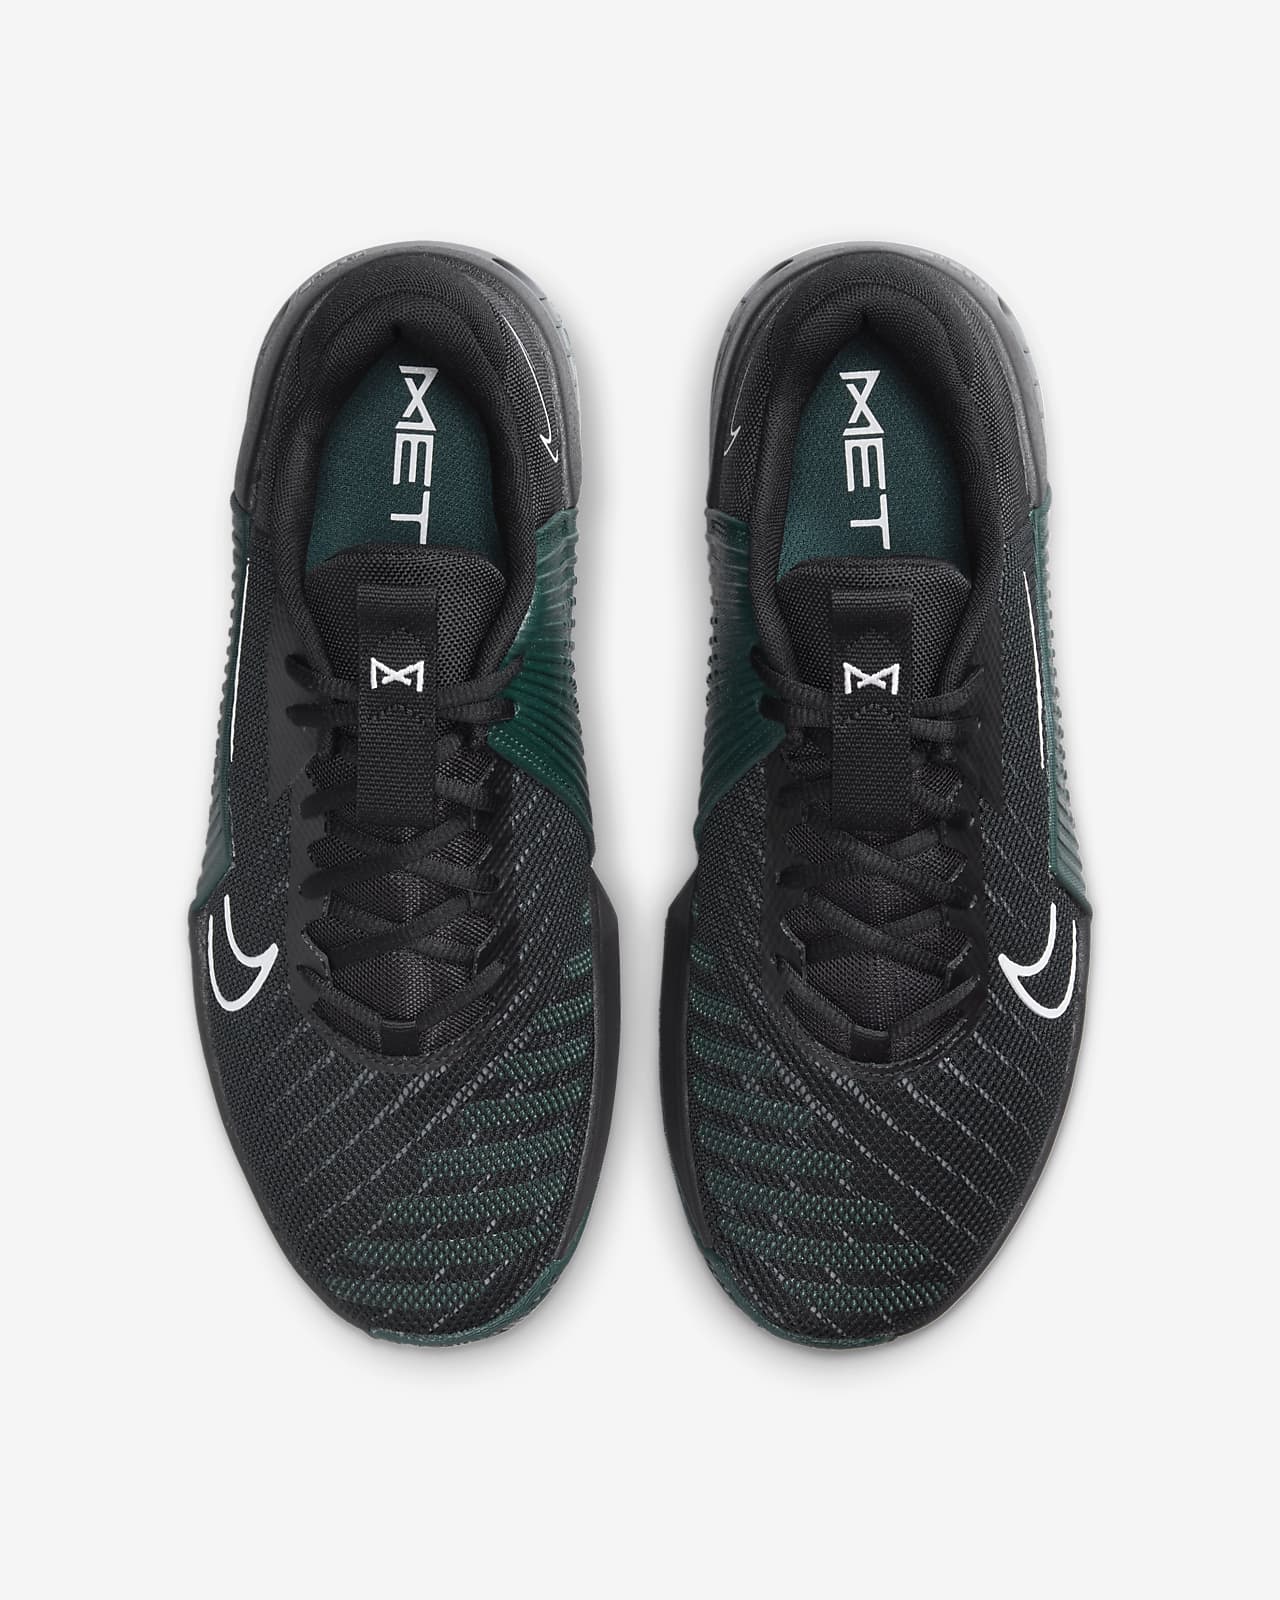 Grab the Nike Metcon 9 now - WIT Fitness